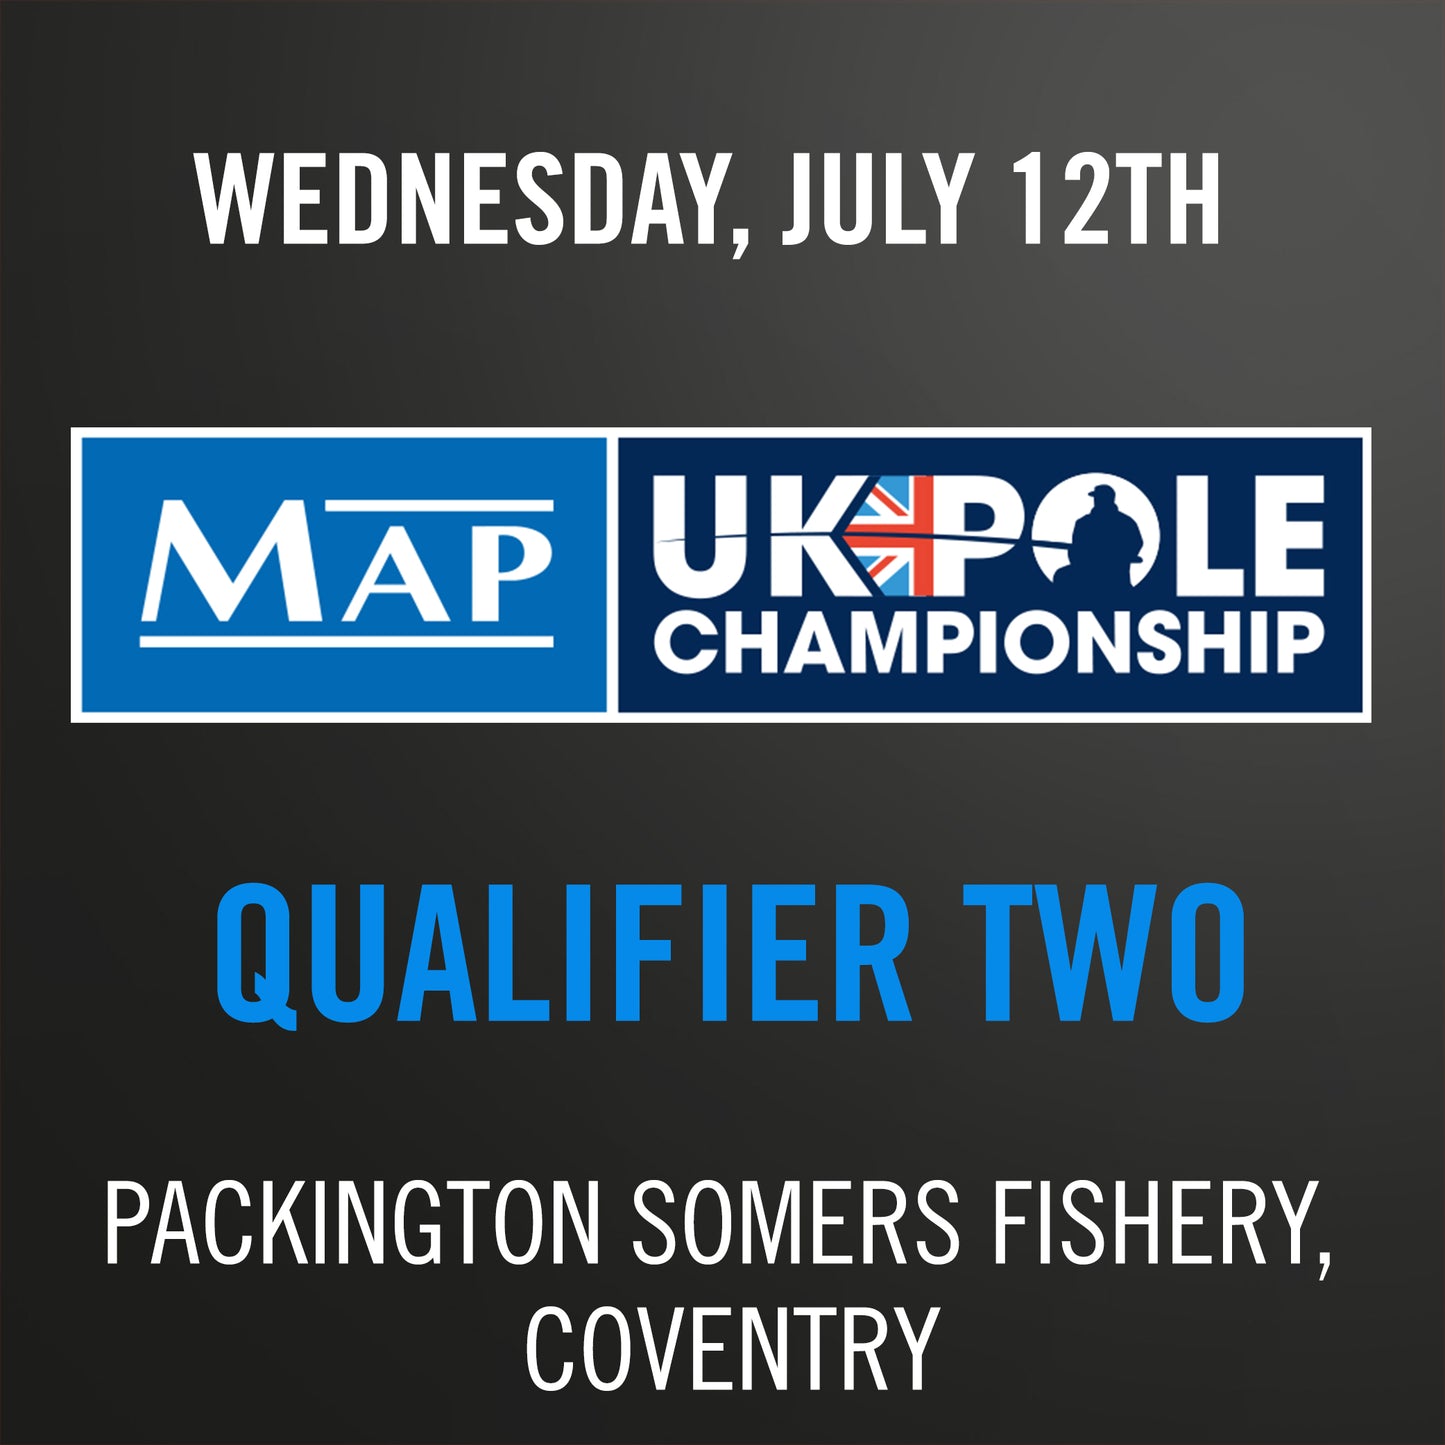 MAP UK Pole Championship - Qualifier Two Ticket